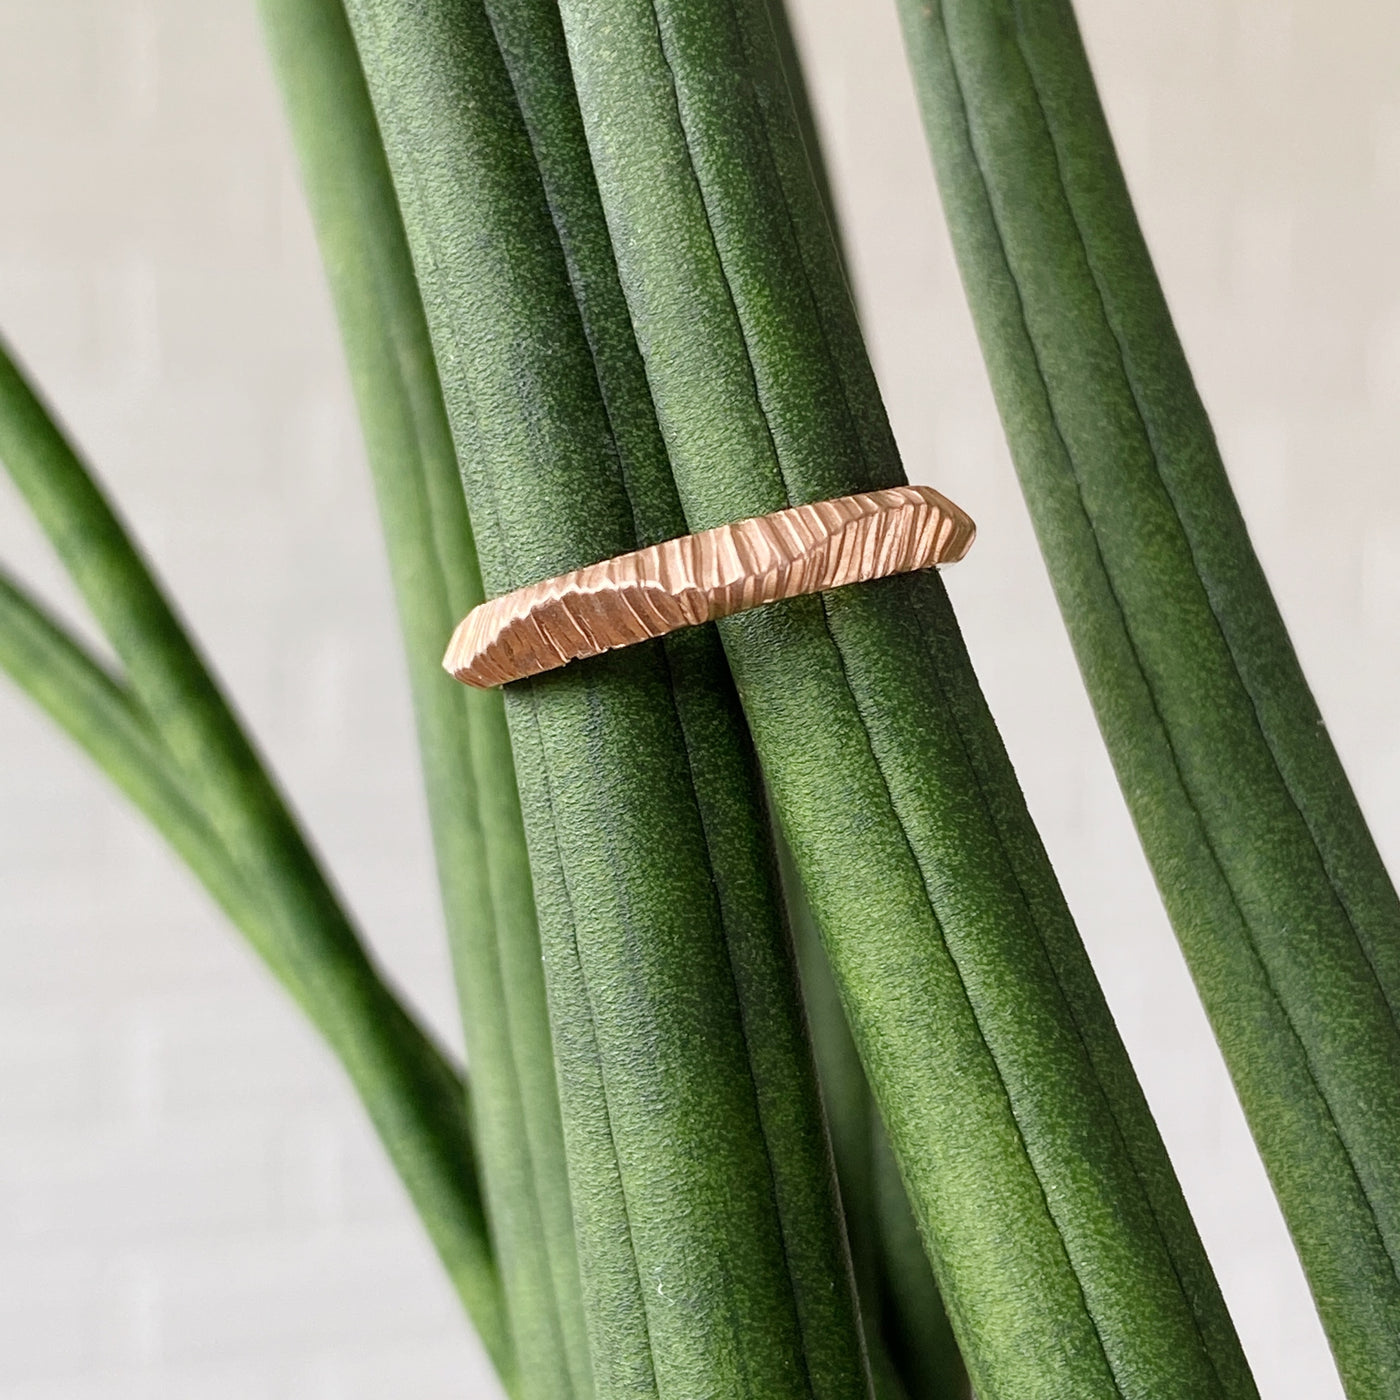 Napali undulating carved texture wedding band in 14k rose gold